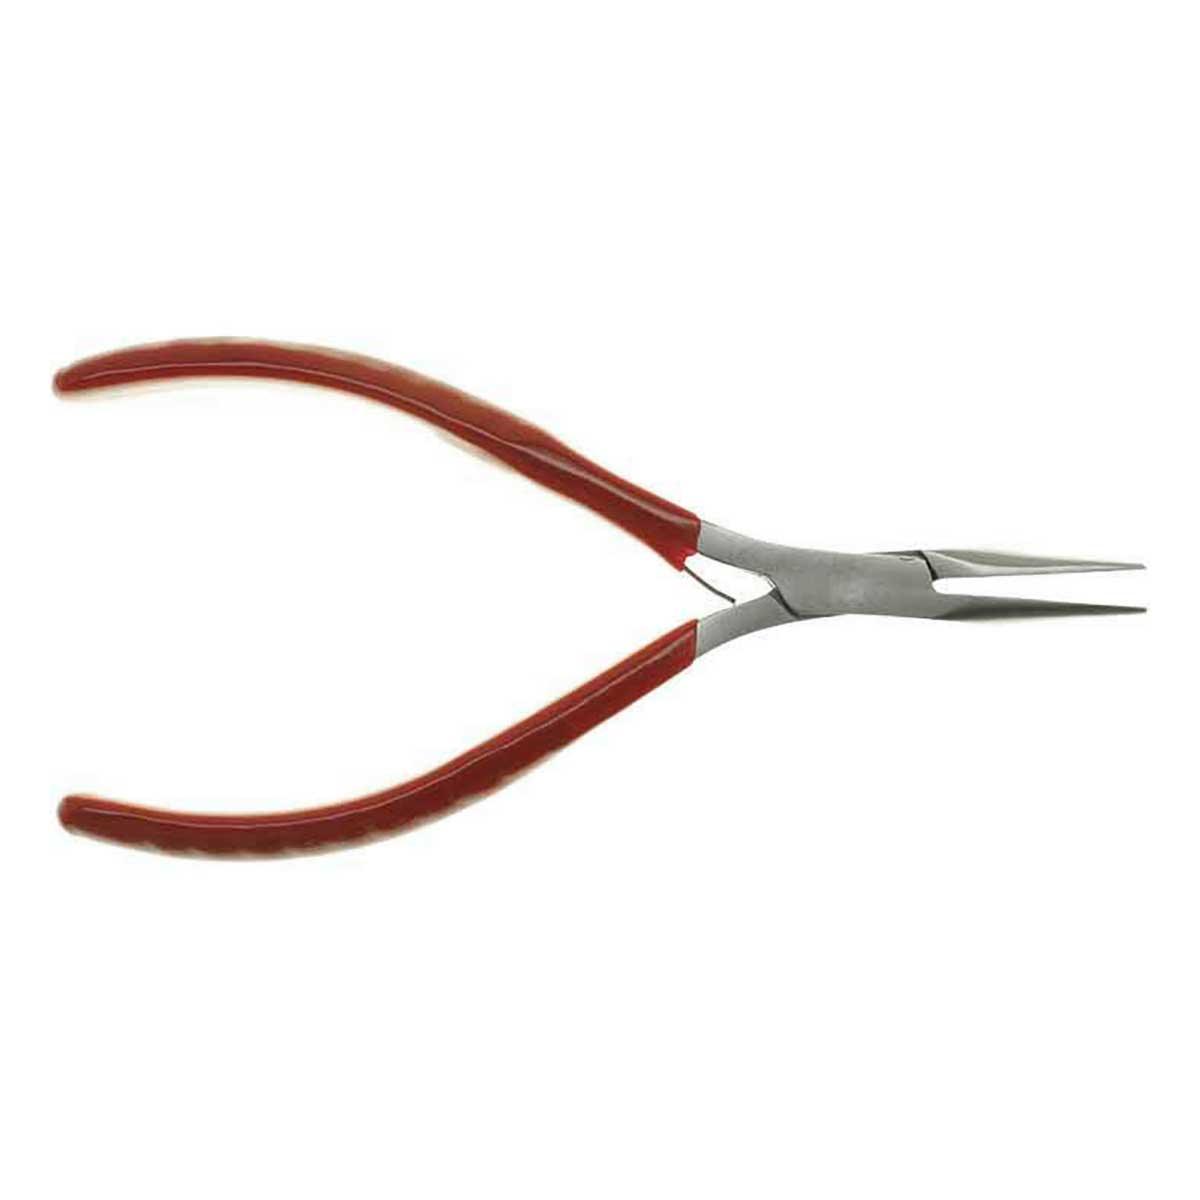 Needle Nose Pliers - 5 inch